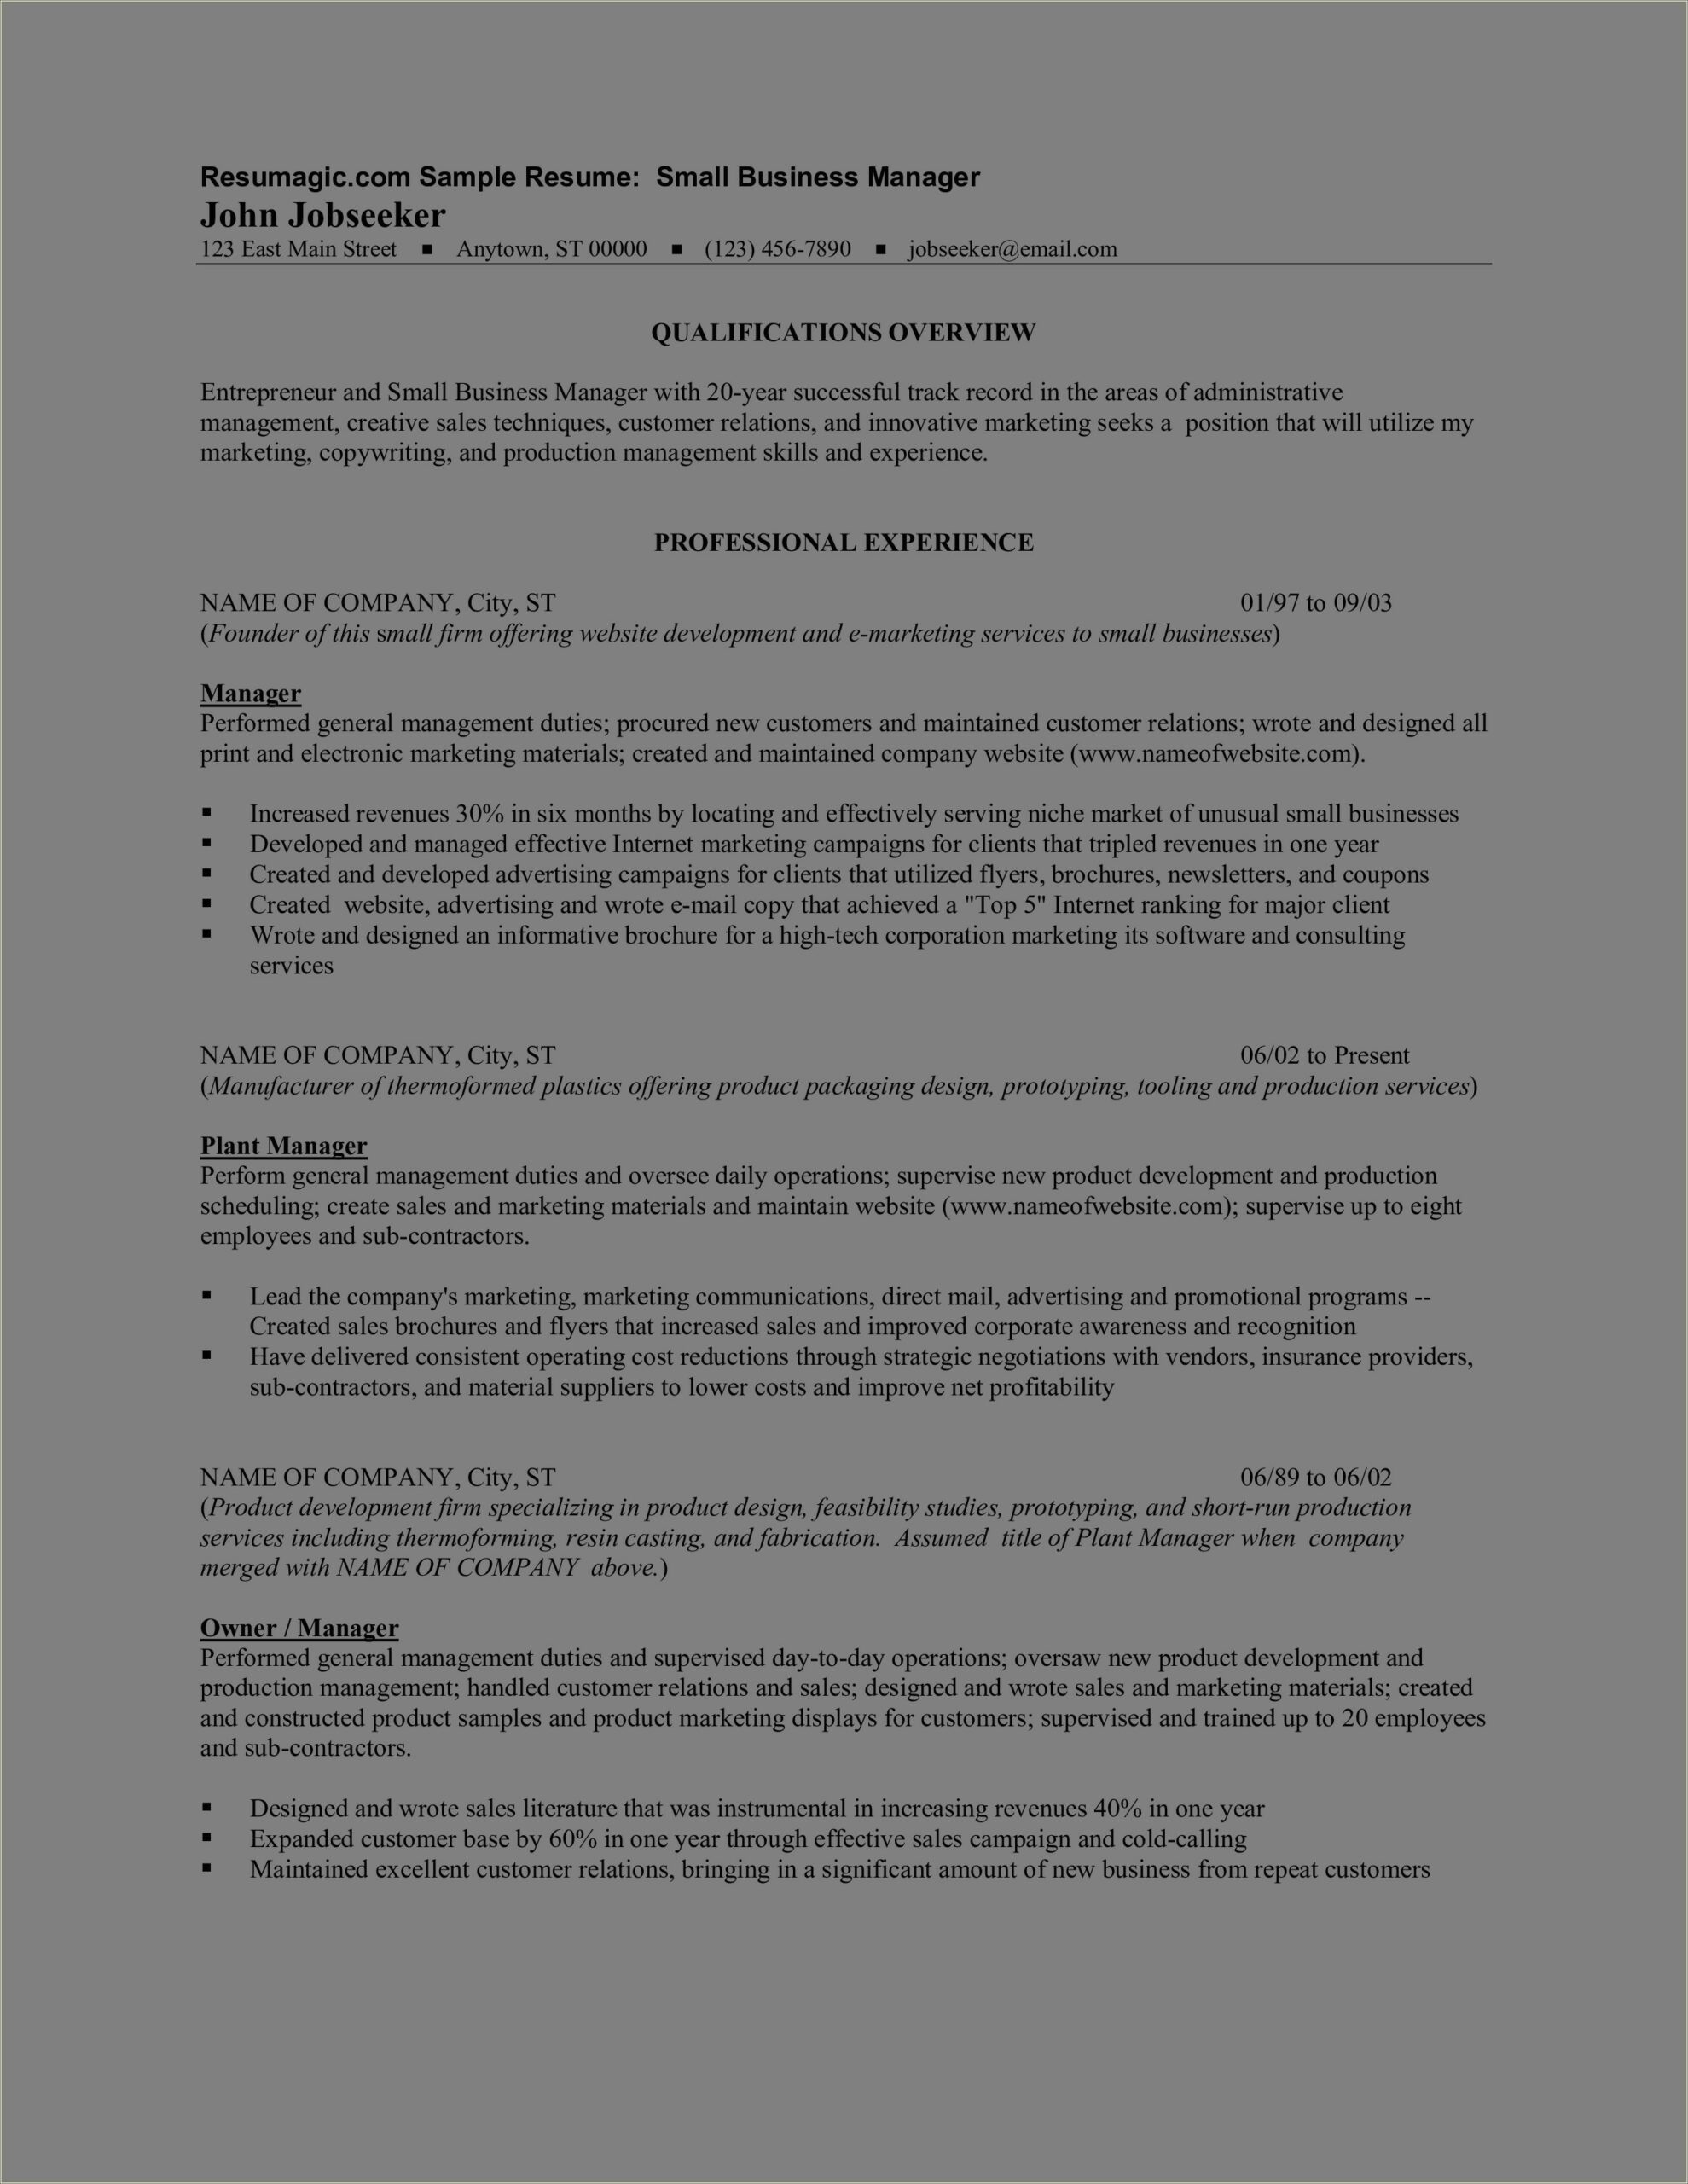 Sample Resume For Developer With Feasibility Study